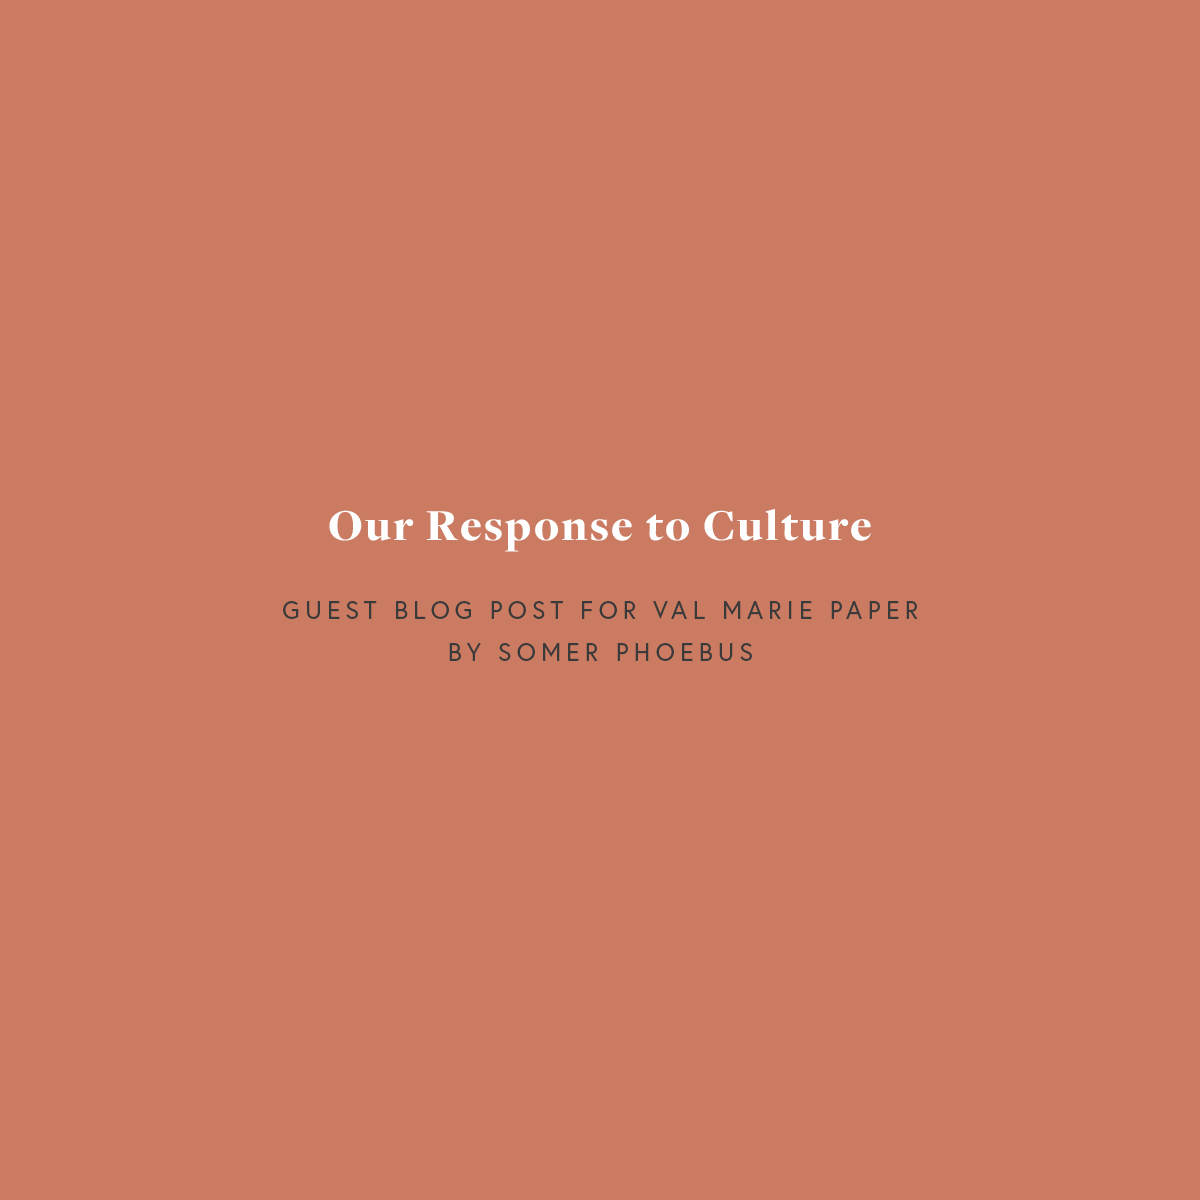 Our Response to Culture